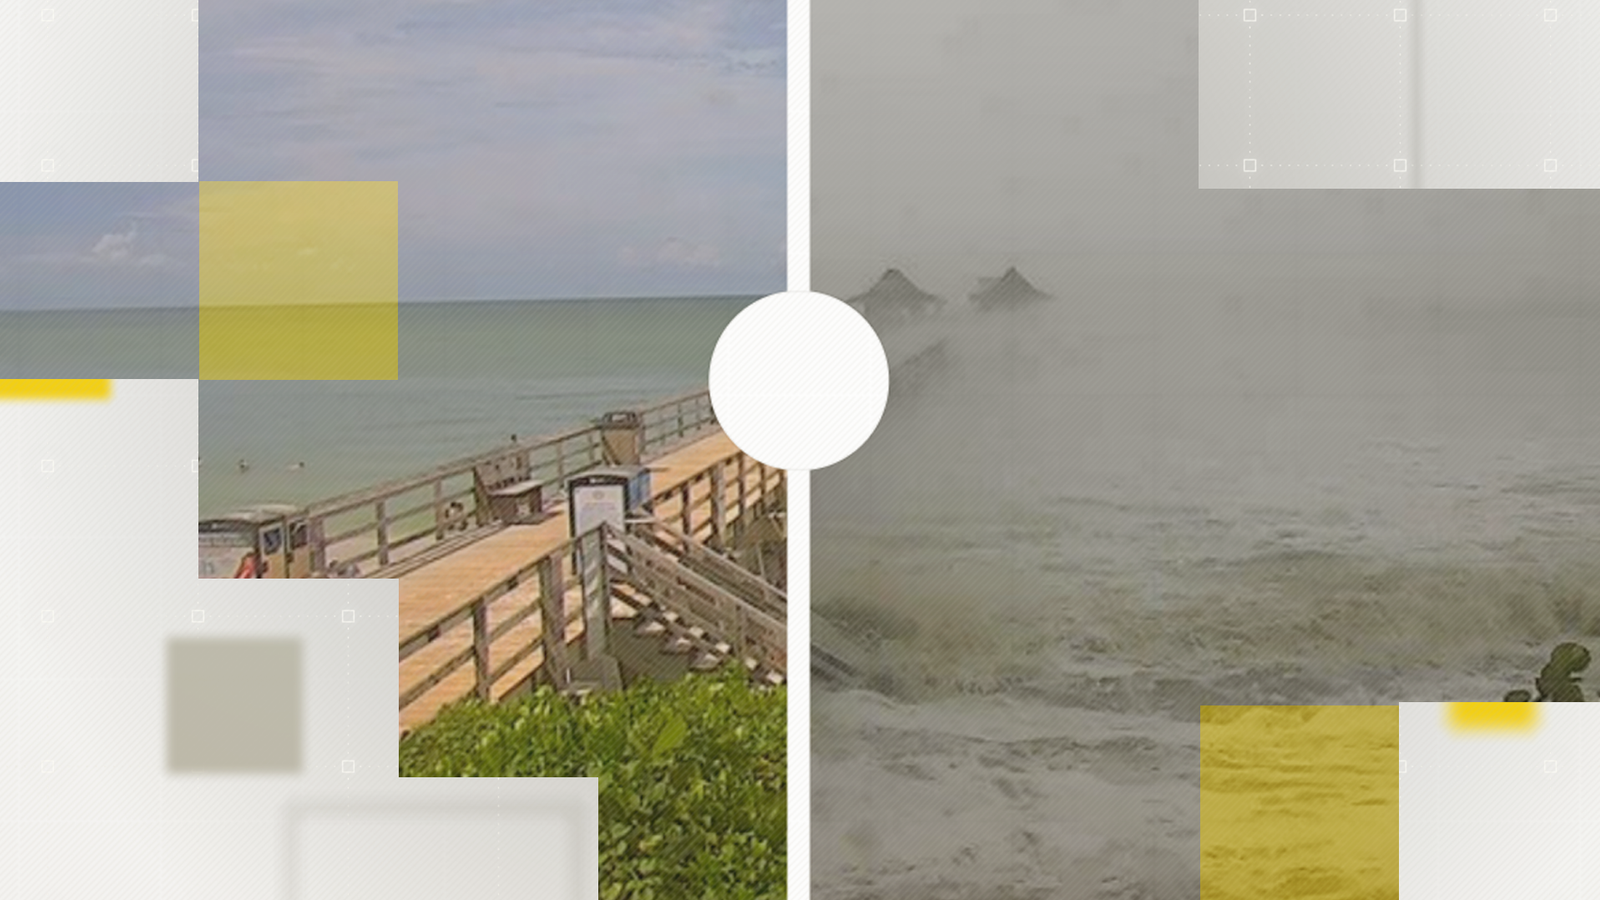 Dramatic before and after images show scale of Hurricane Ian's destruction in Florida